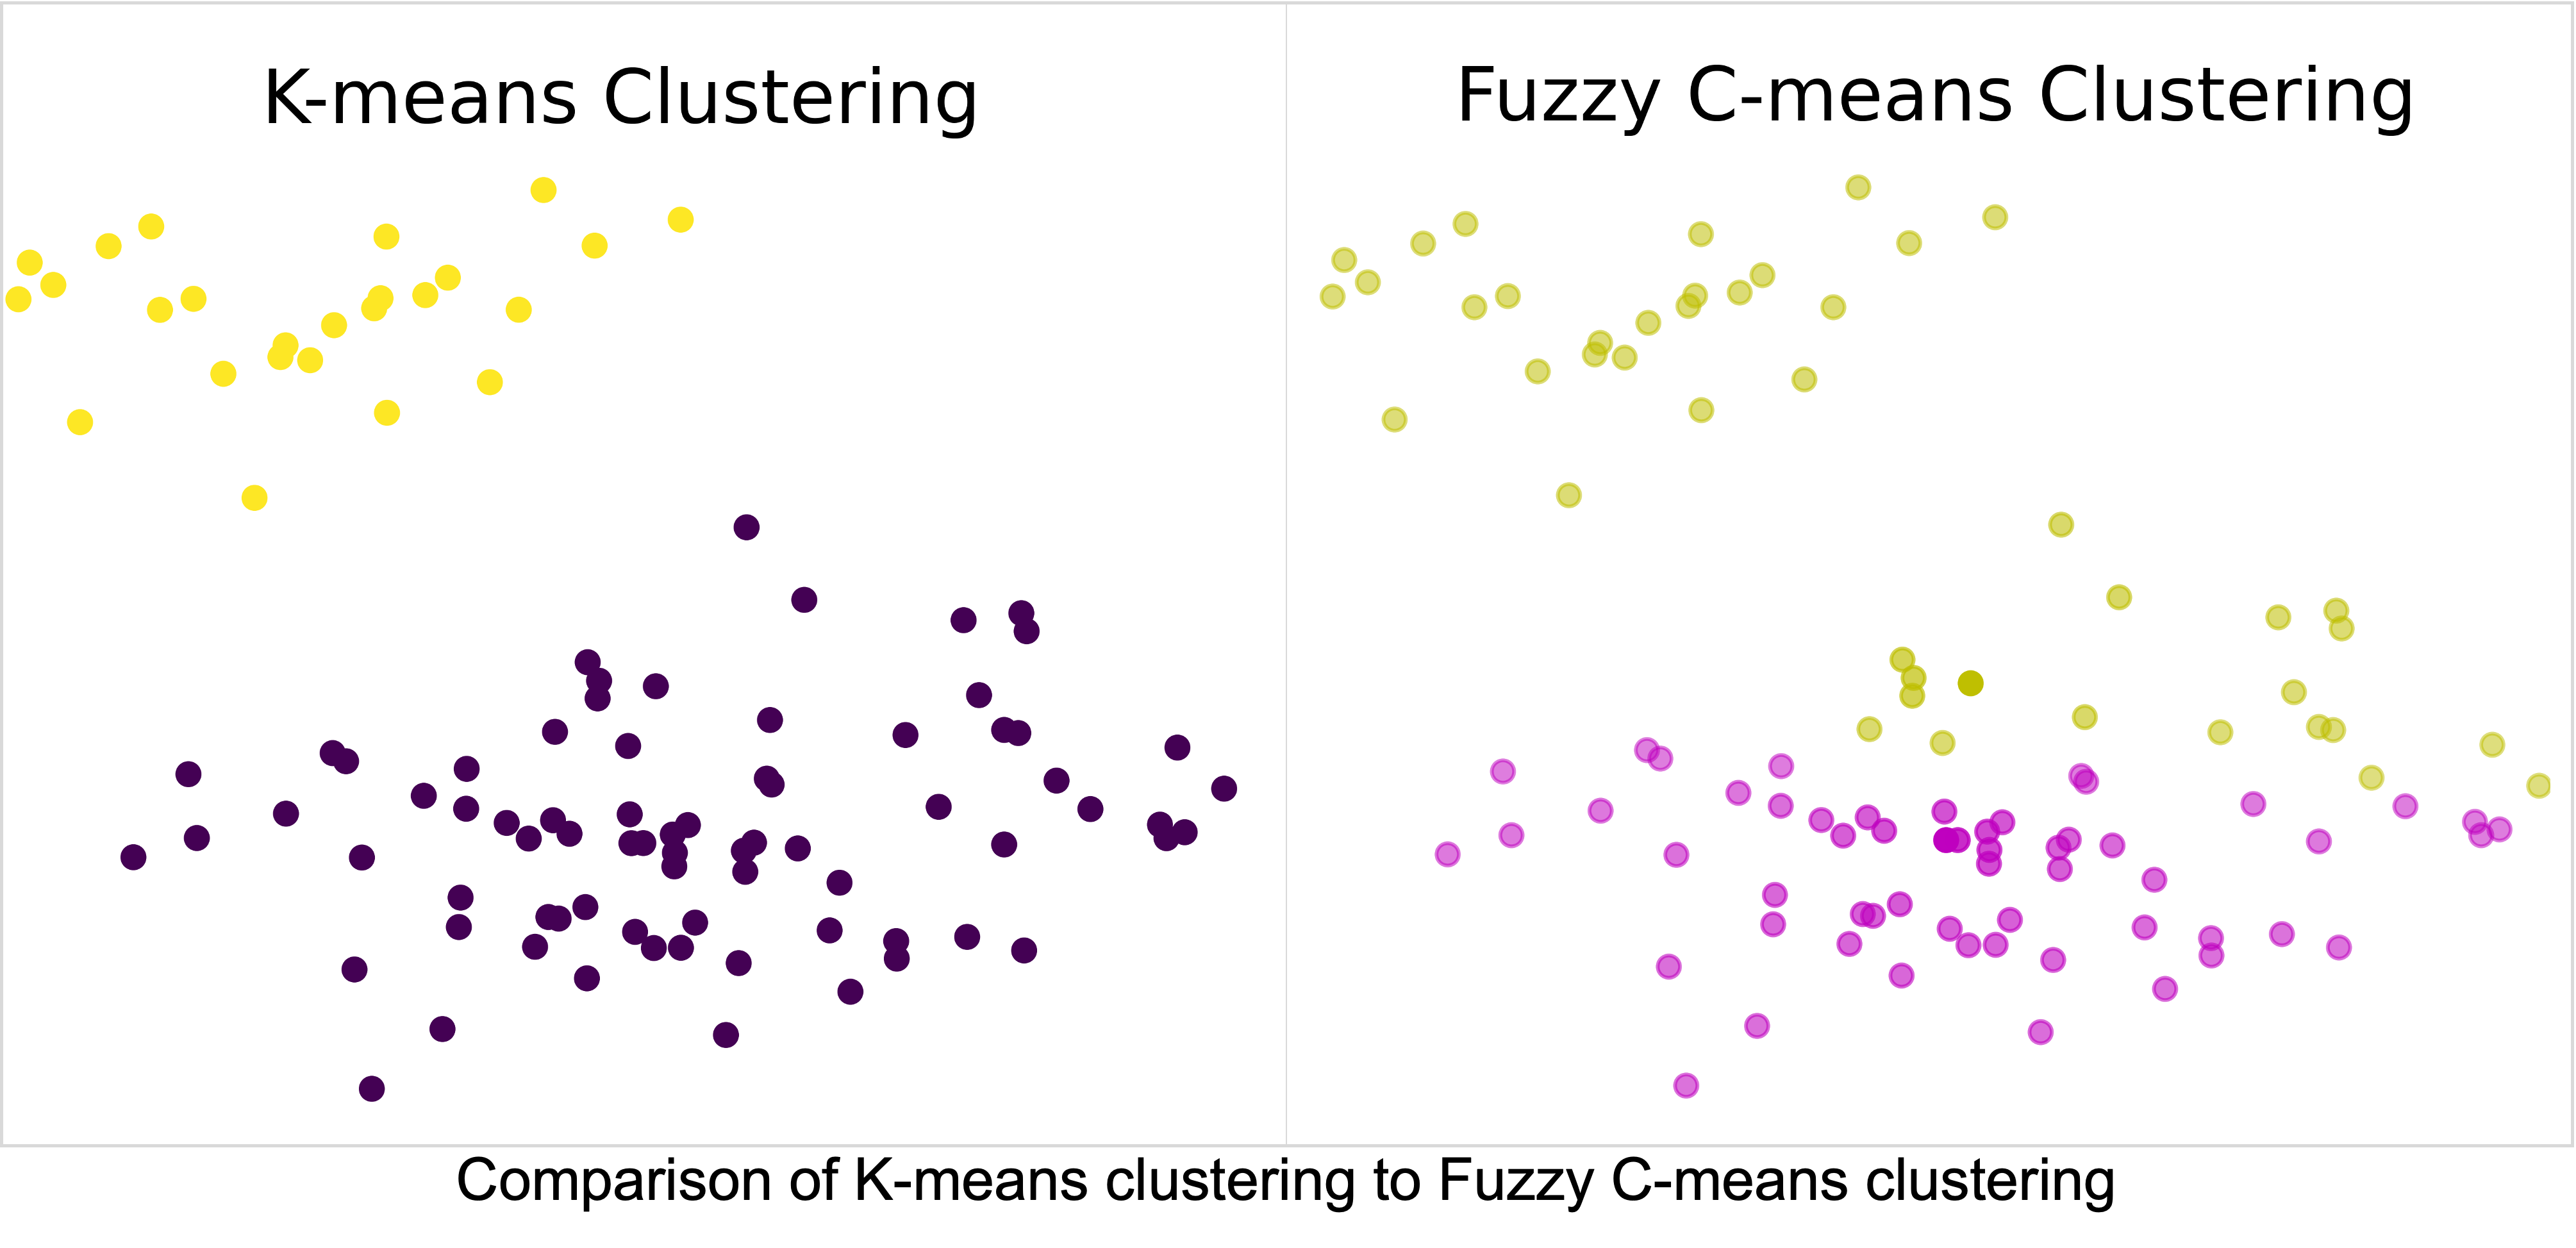 Comparison of k-means clustering and fuzzy-c-means clustering